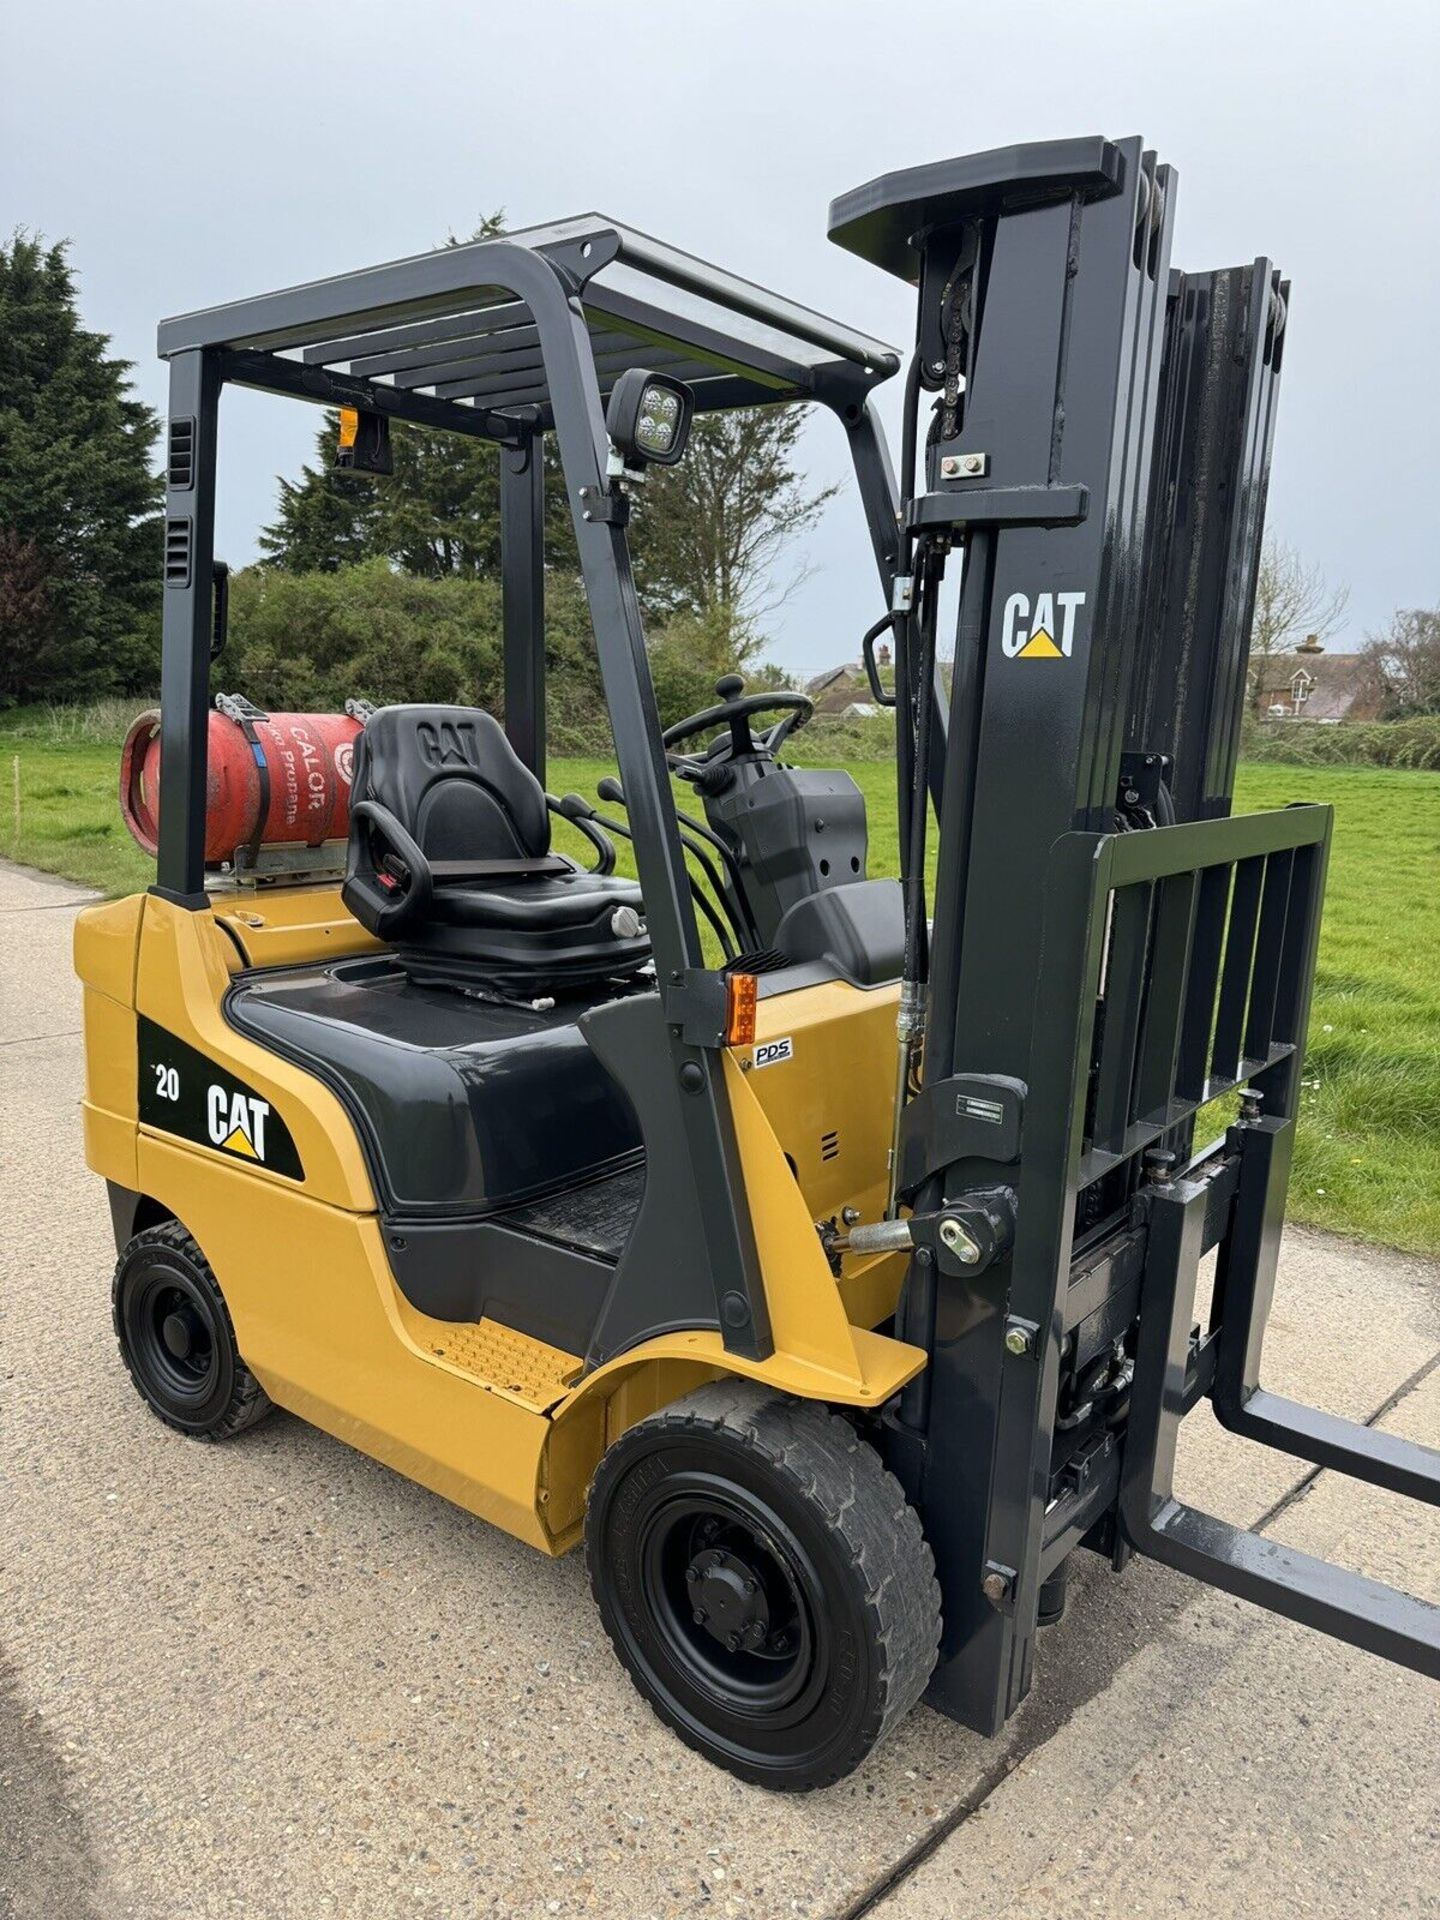 2017, CATERPILLAR - 2 Tonne Gas Forklift (Only 1235 Hours) - Image 3 of 6